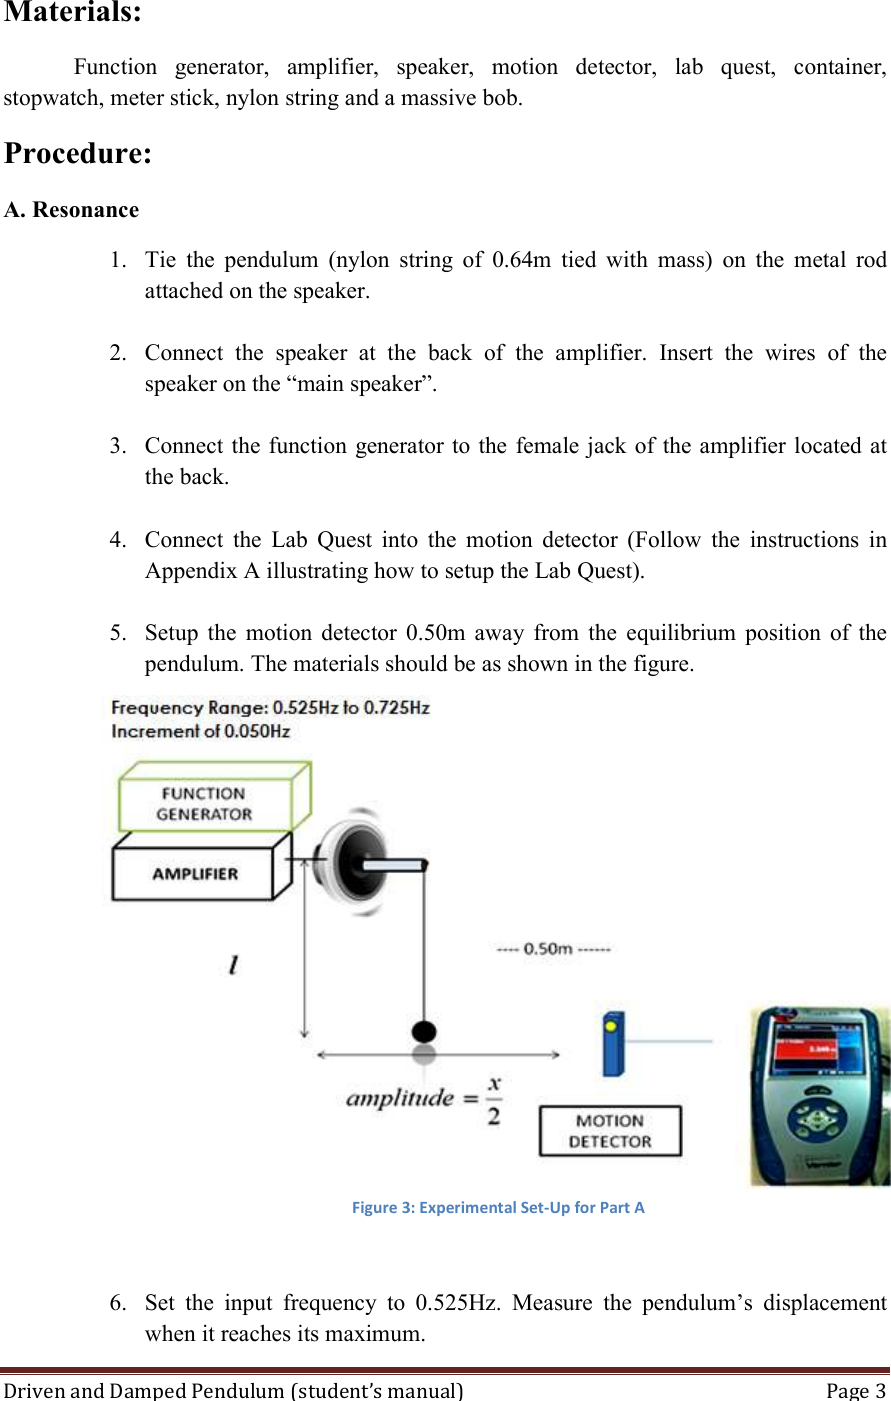 Page 3 of 10 - 01 Driven And Damped Pendulum Experiment Manual